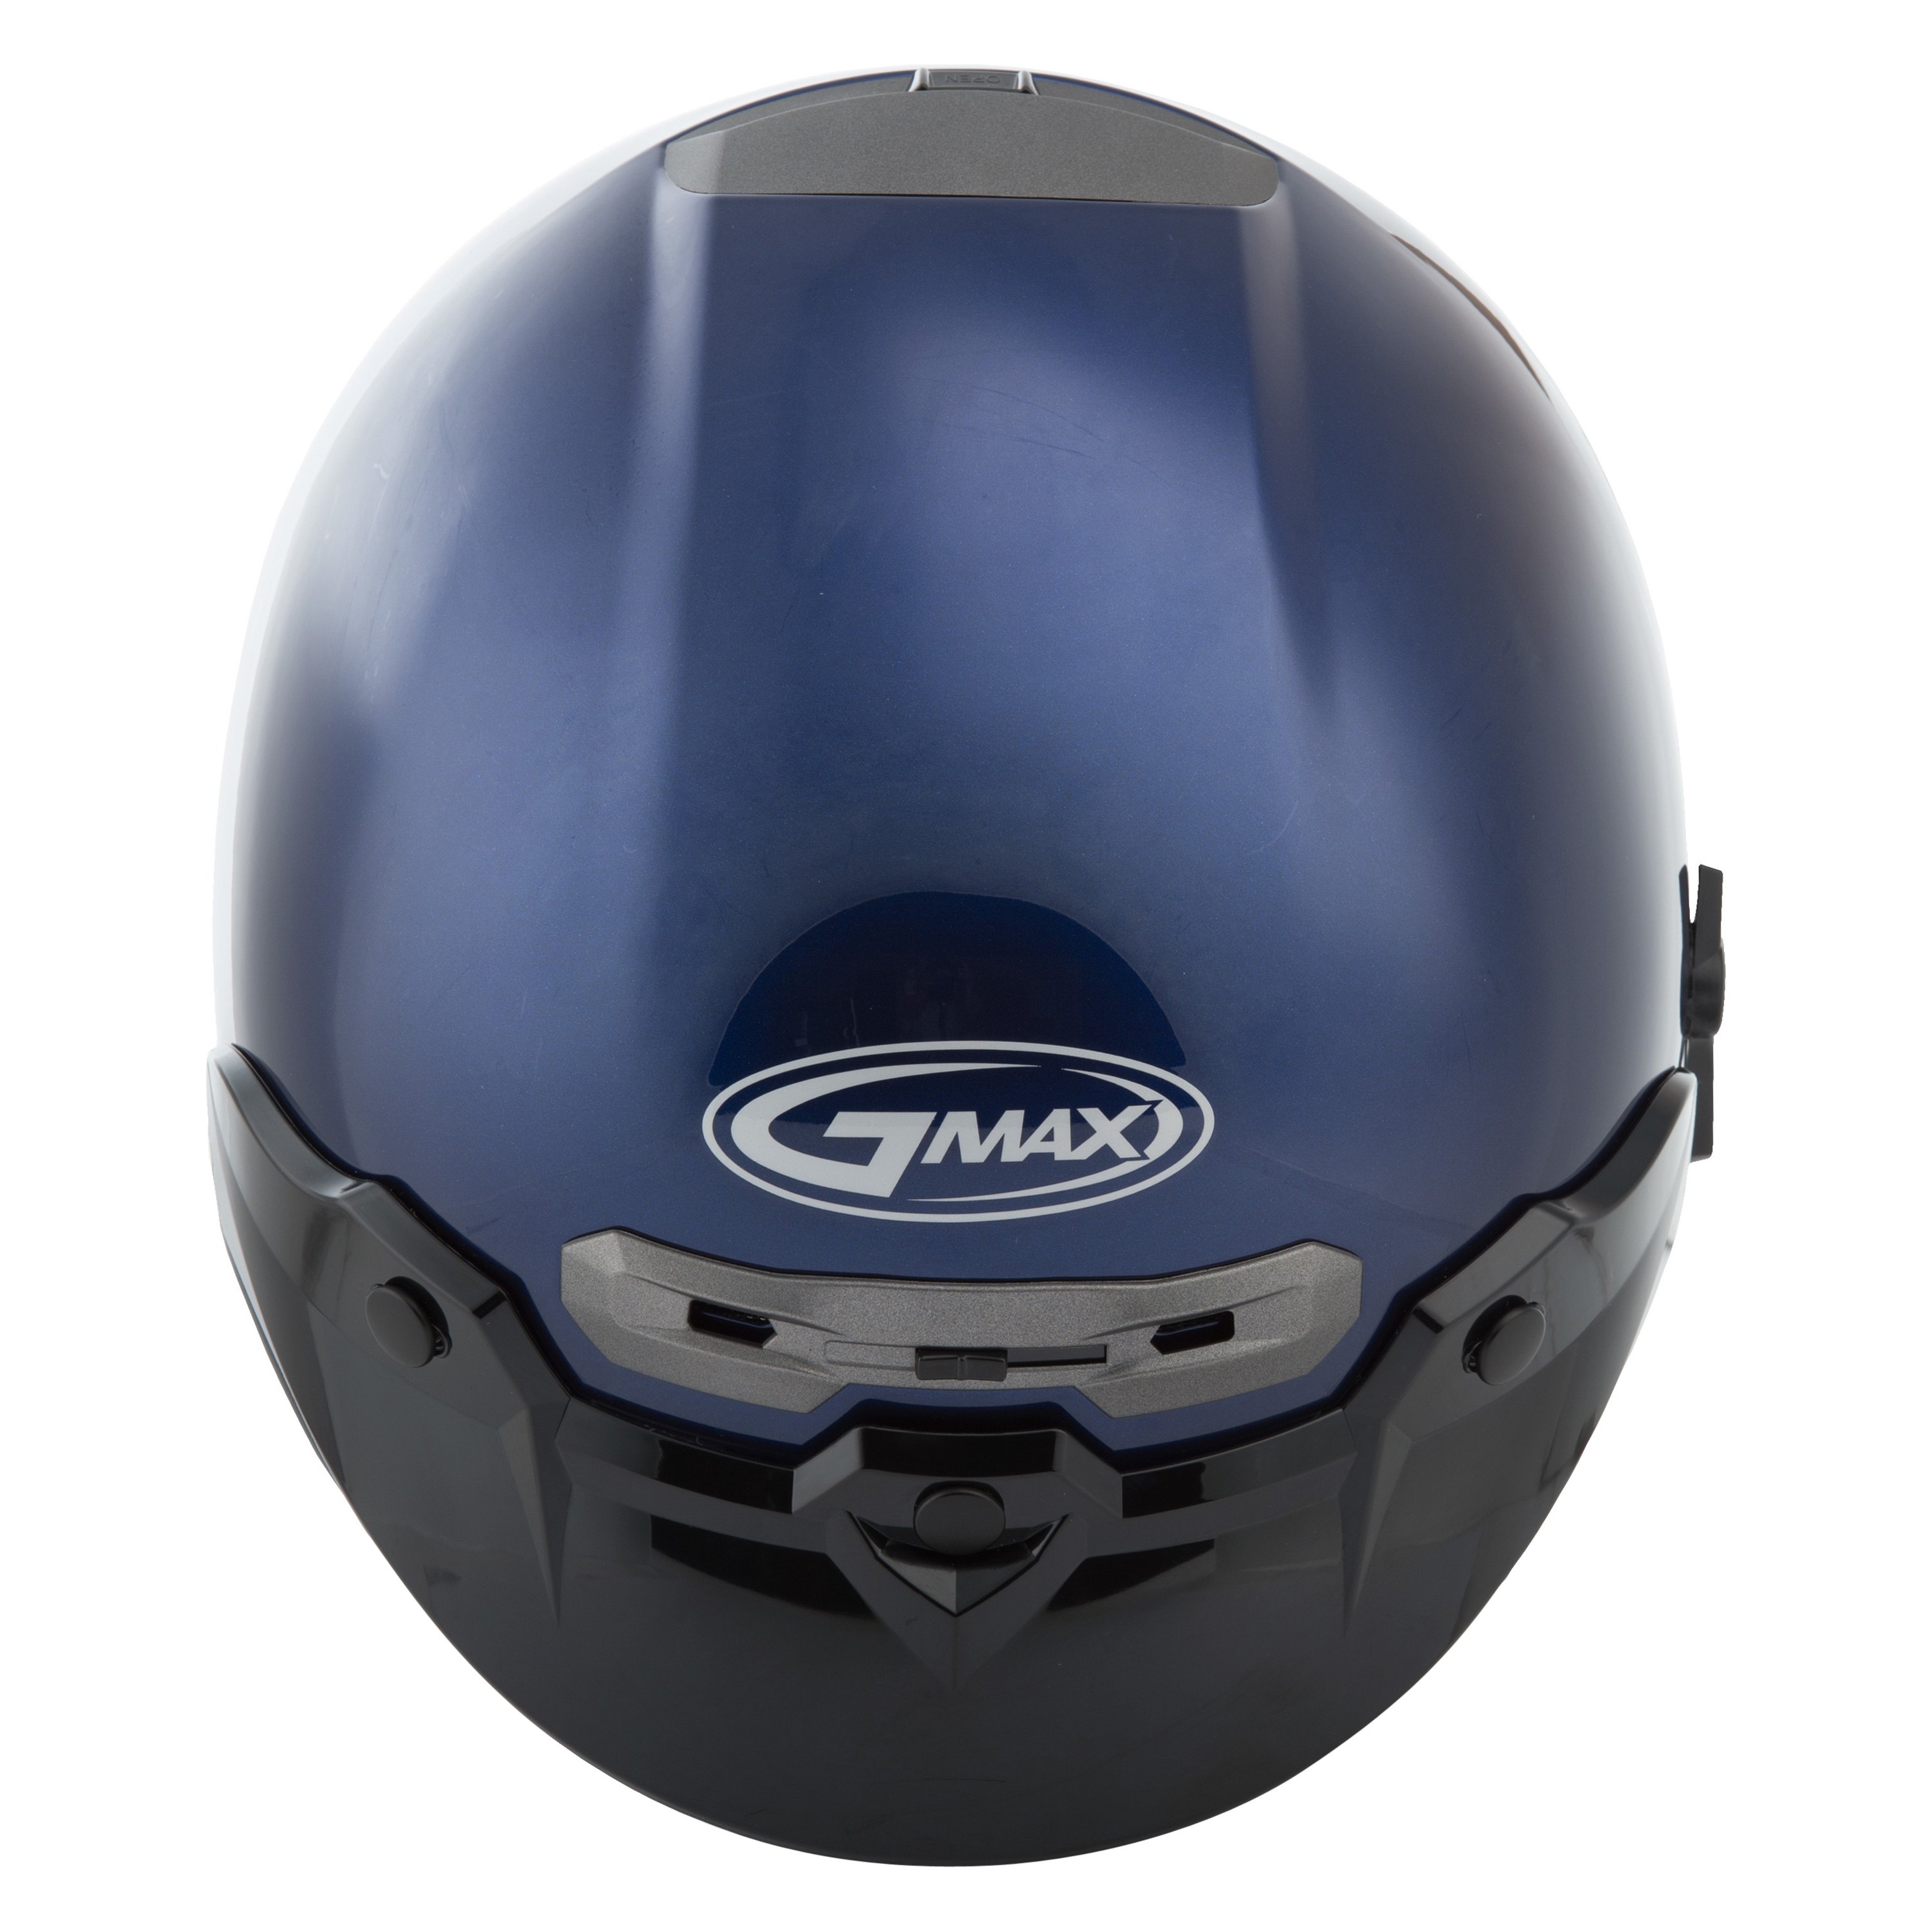 Gmax® G1320494 Gm 32 Small Blue Open Face Helmet With Flip Down Shield